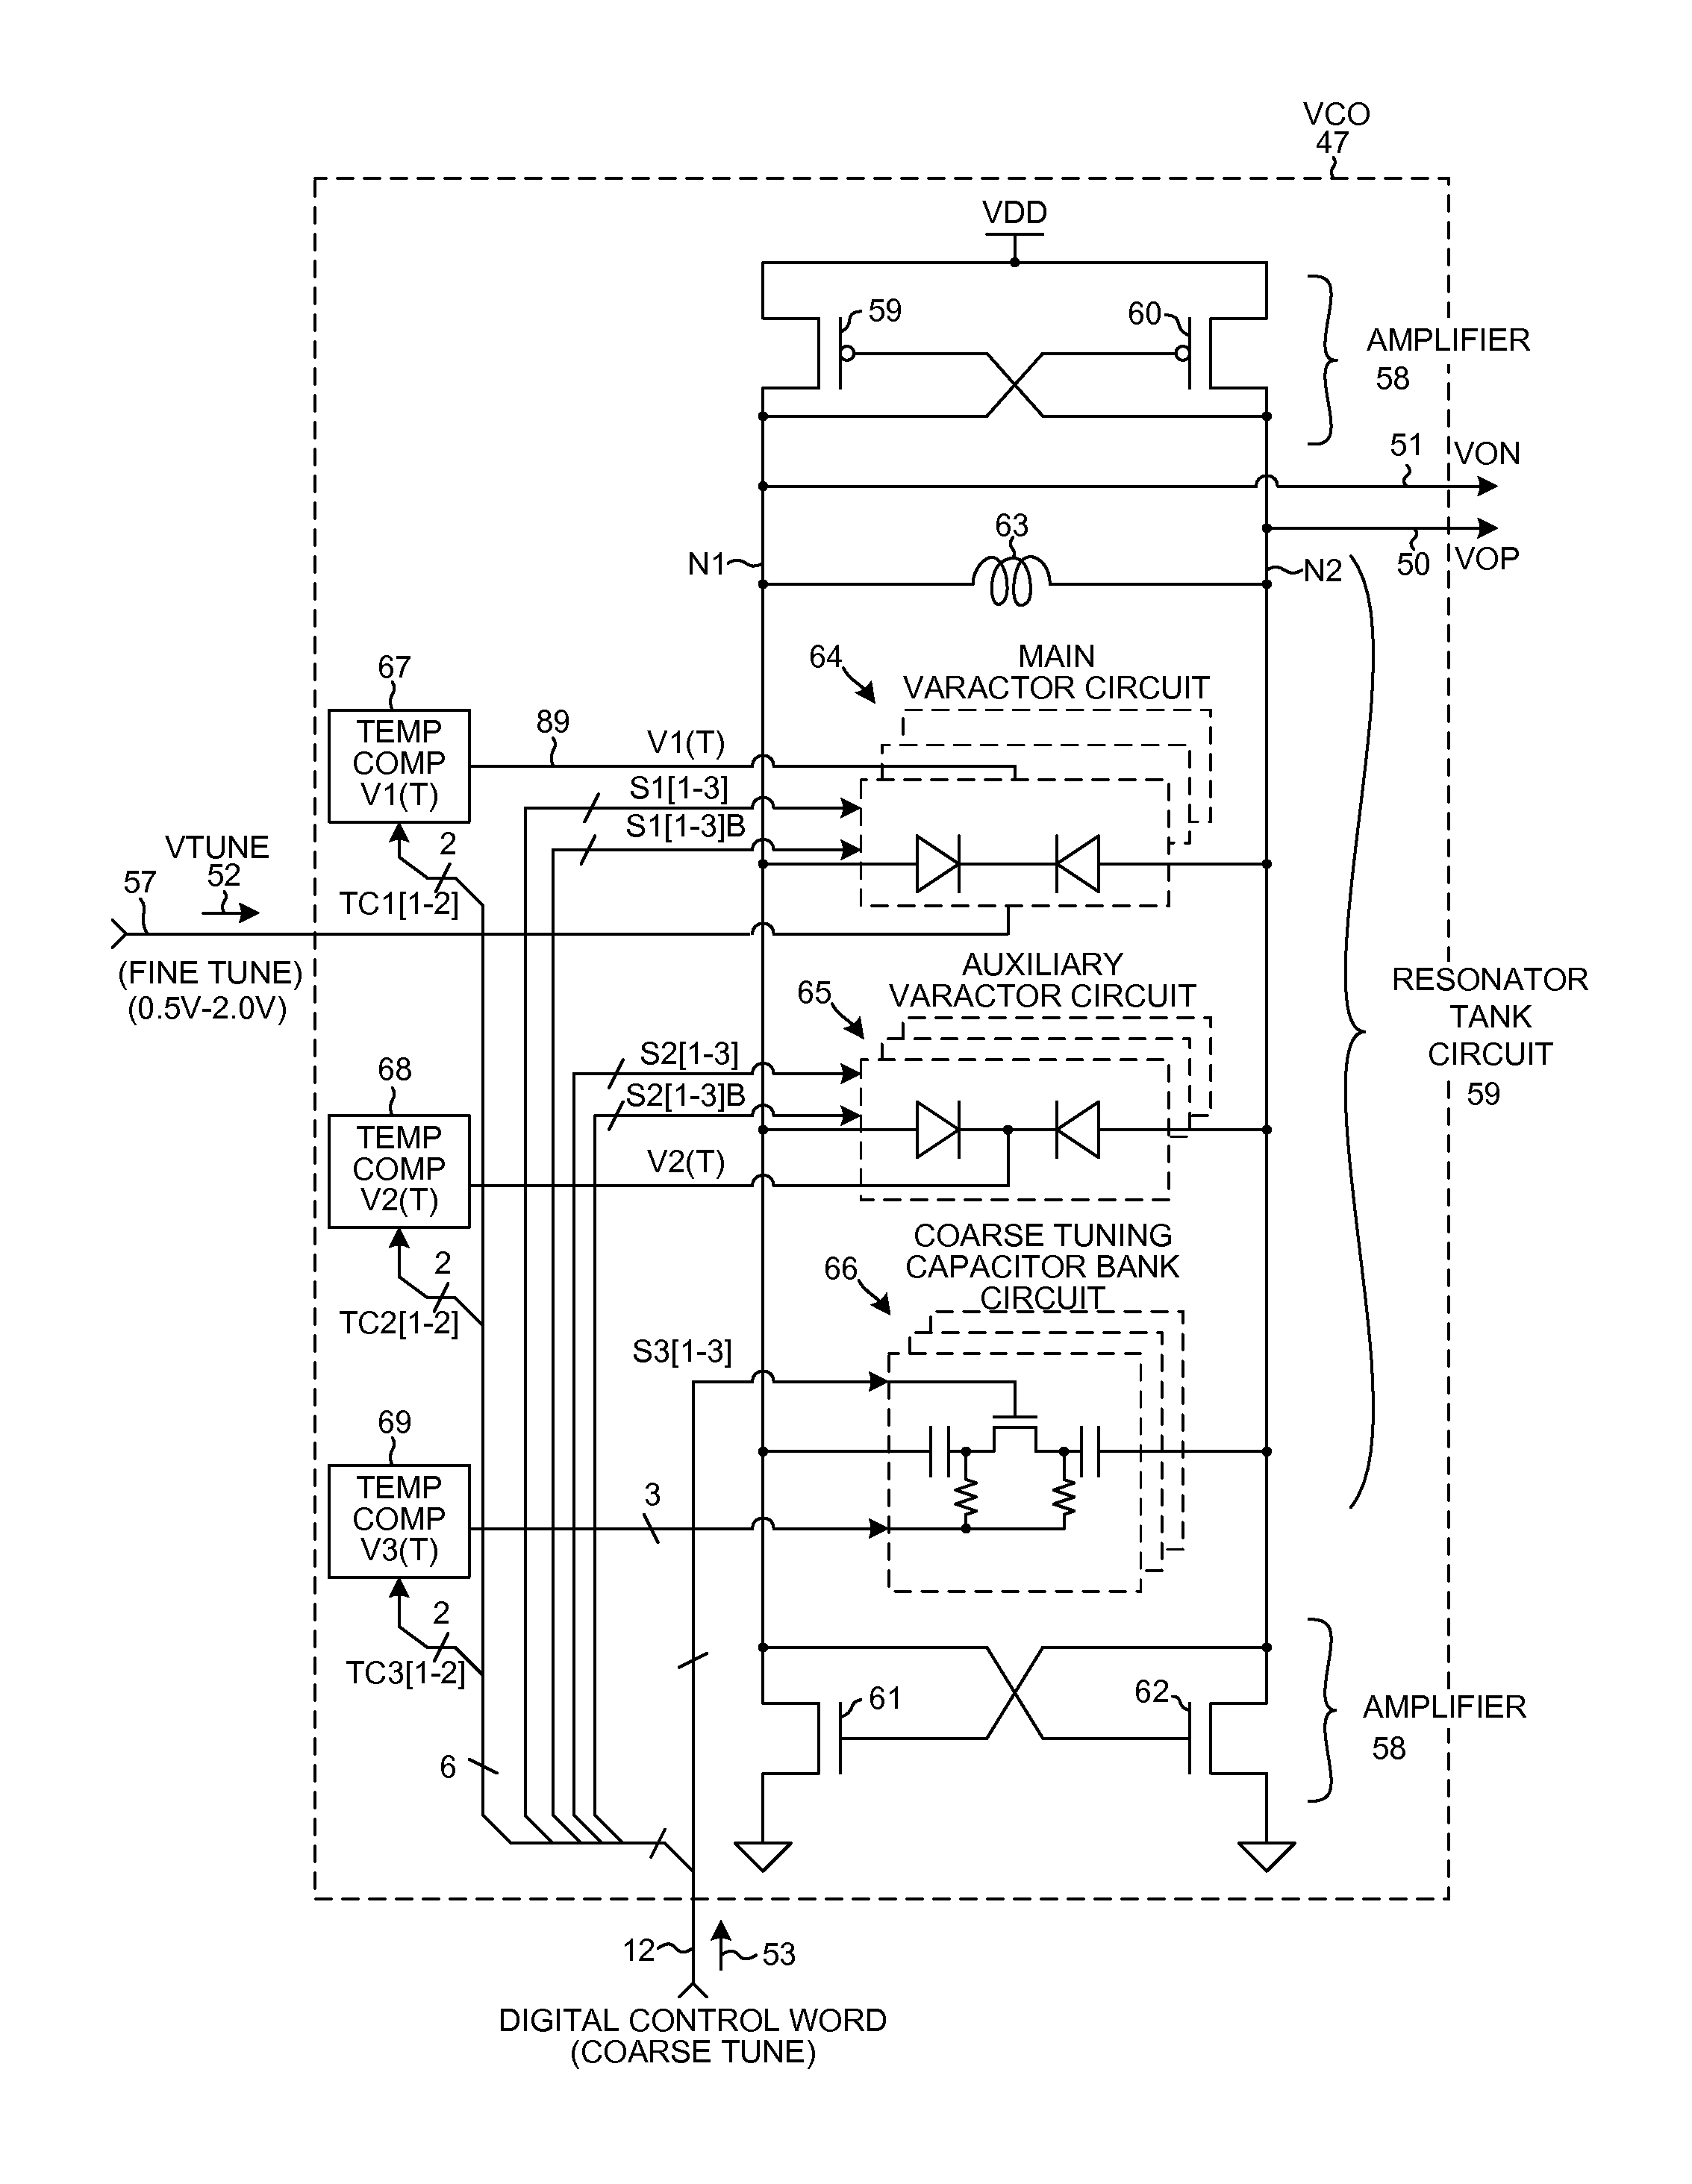 Wideband temperature compensated resonator and wideband vco